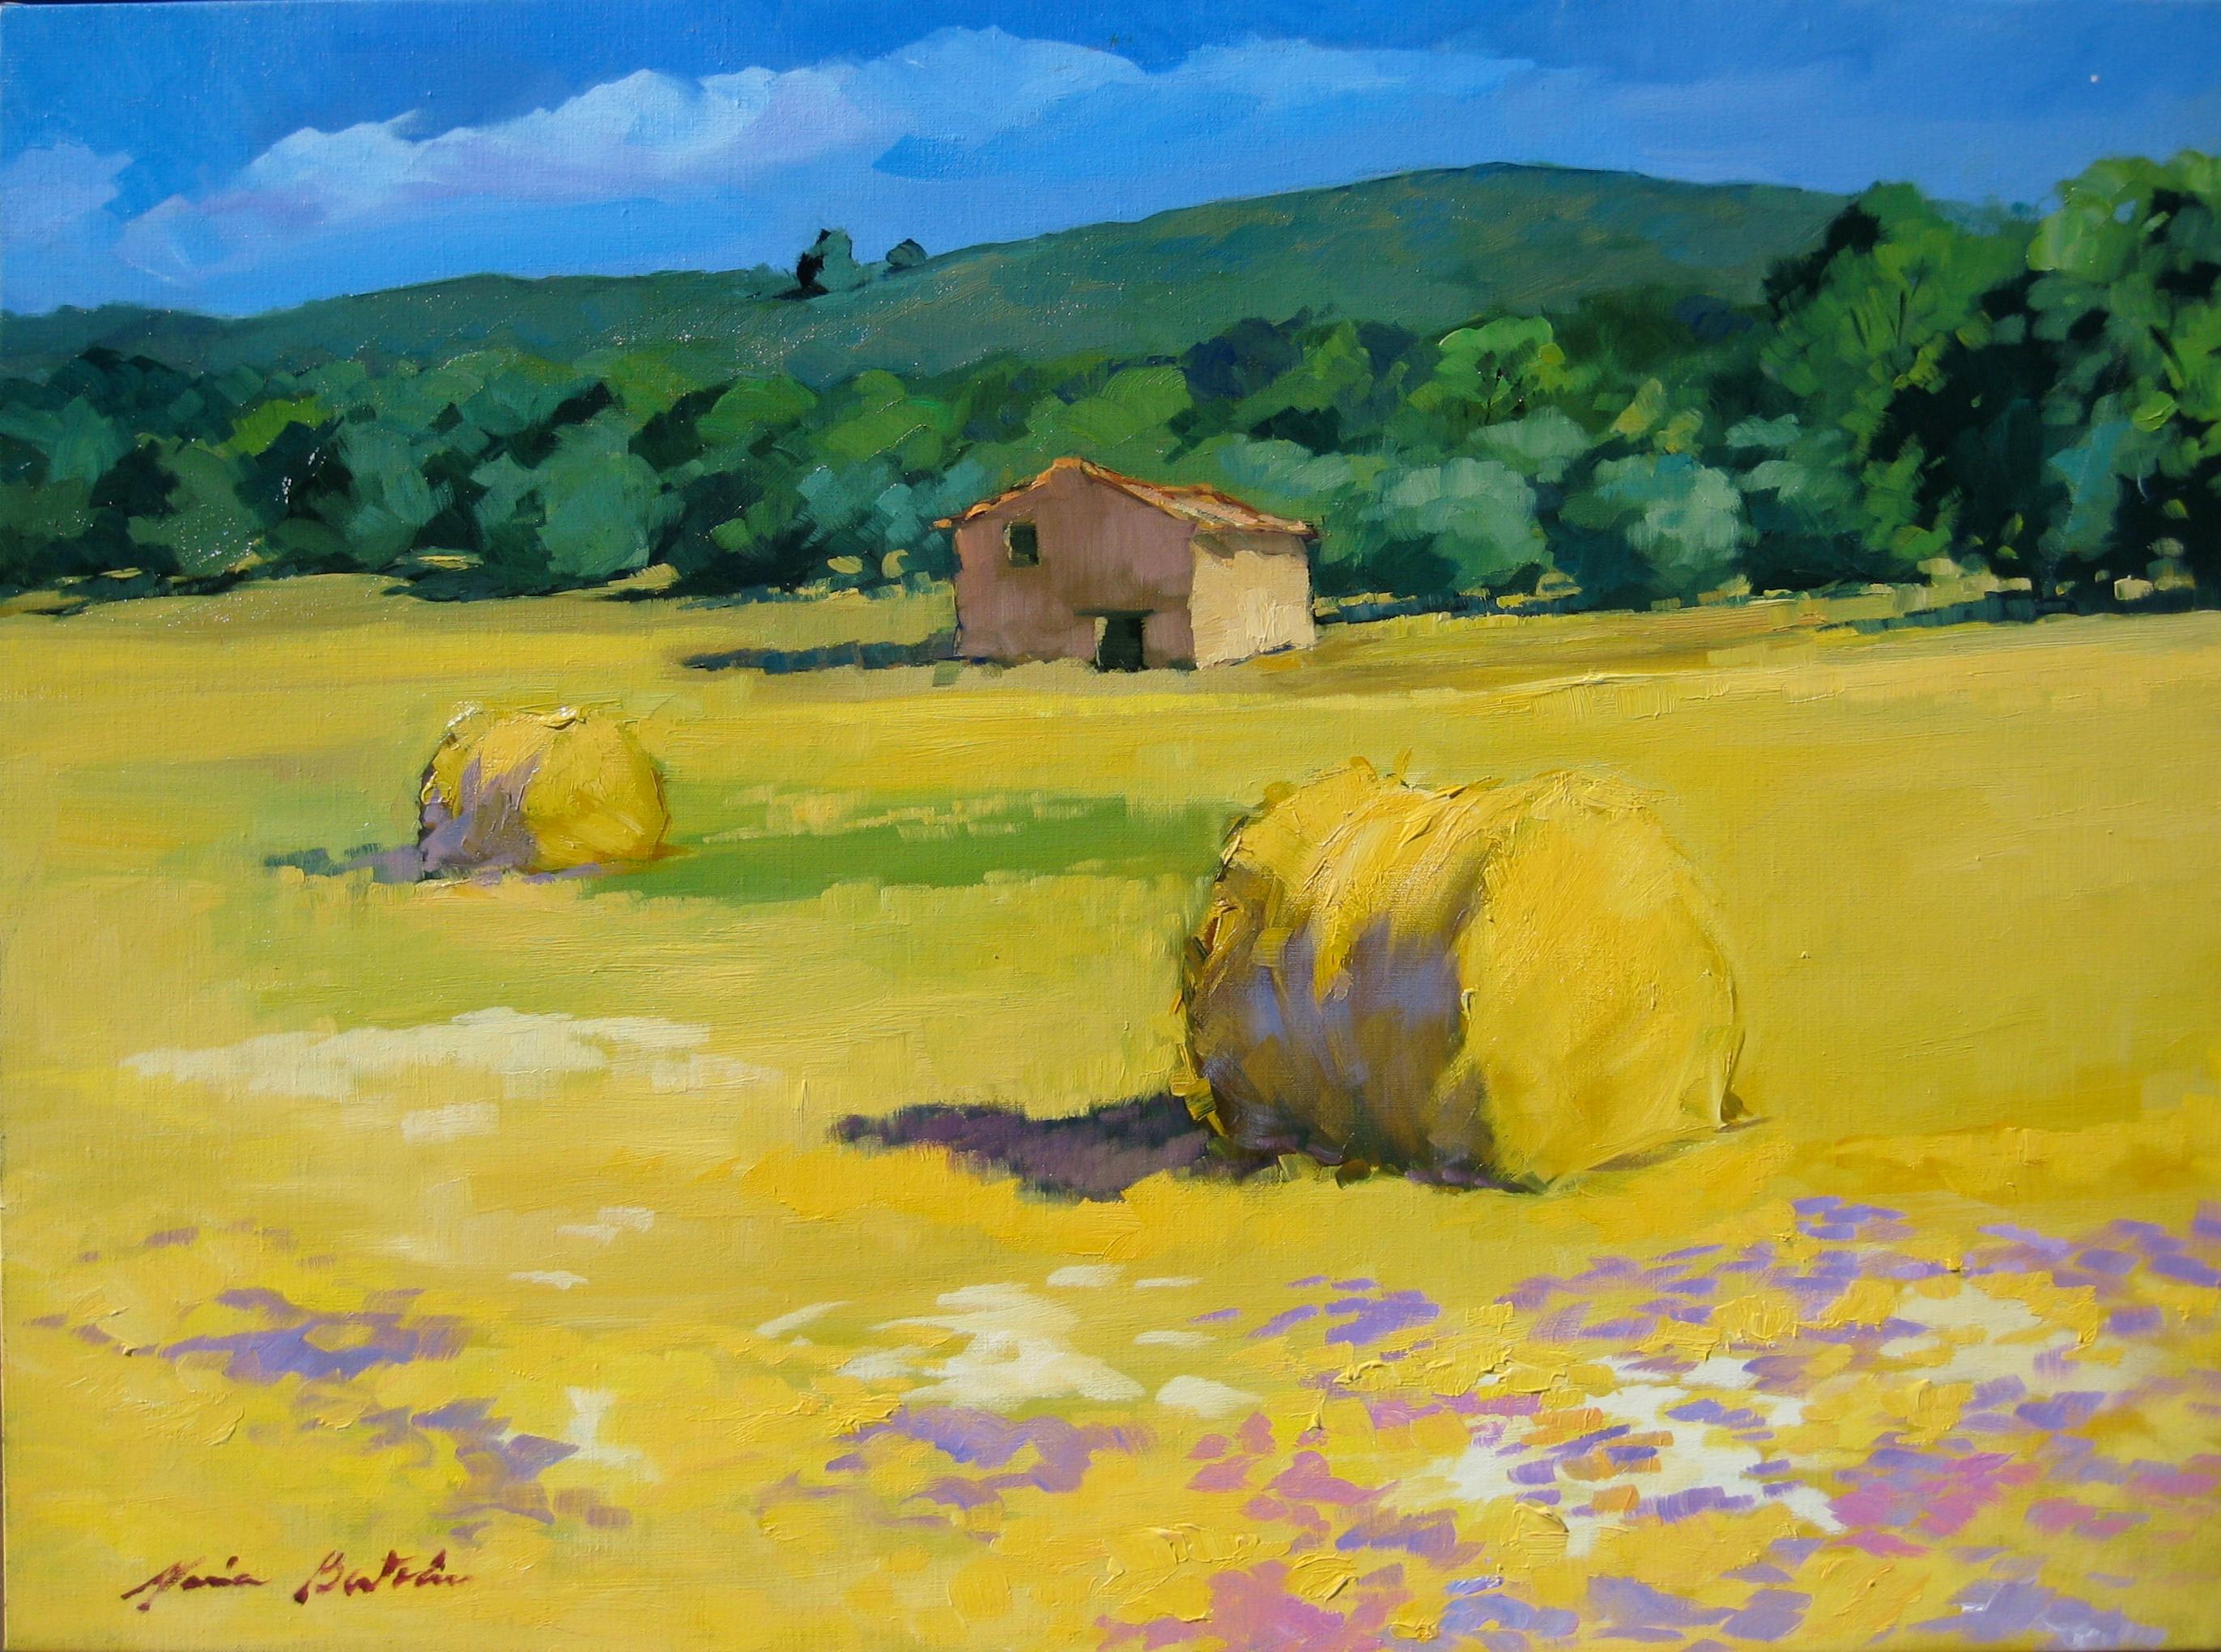 Maria Bertan Landscape Painting - "Les Vieux Hay Rolls" Contemporary Impressionist Oil Painting by Maria Bertran